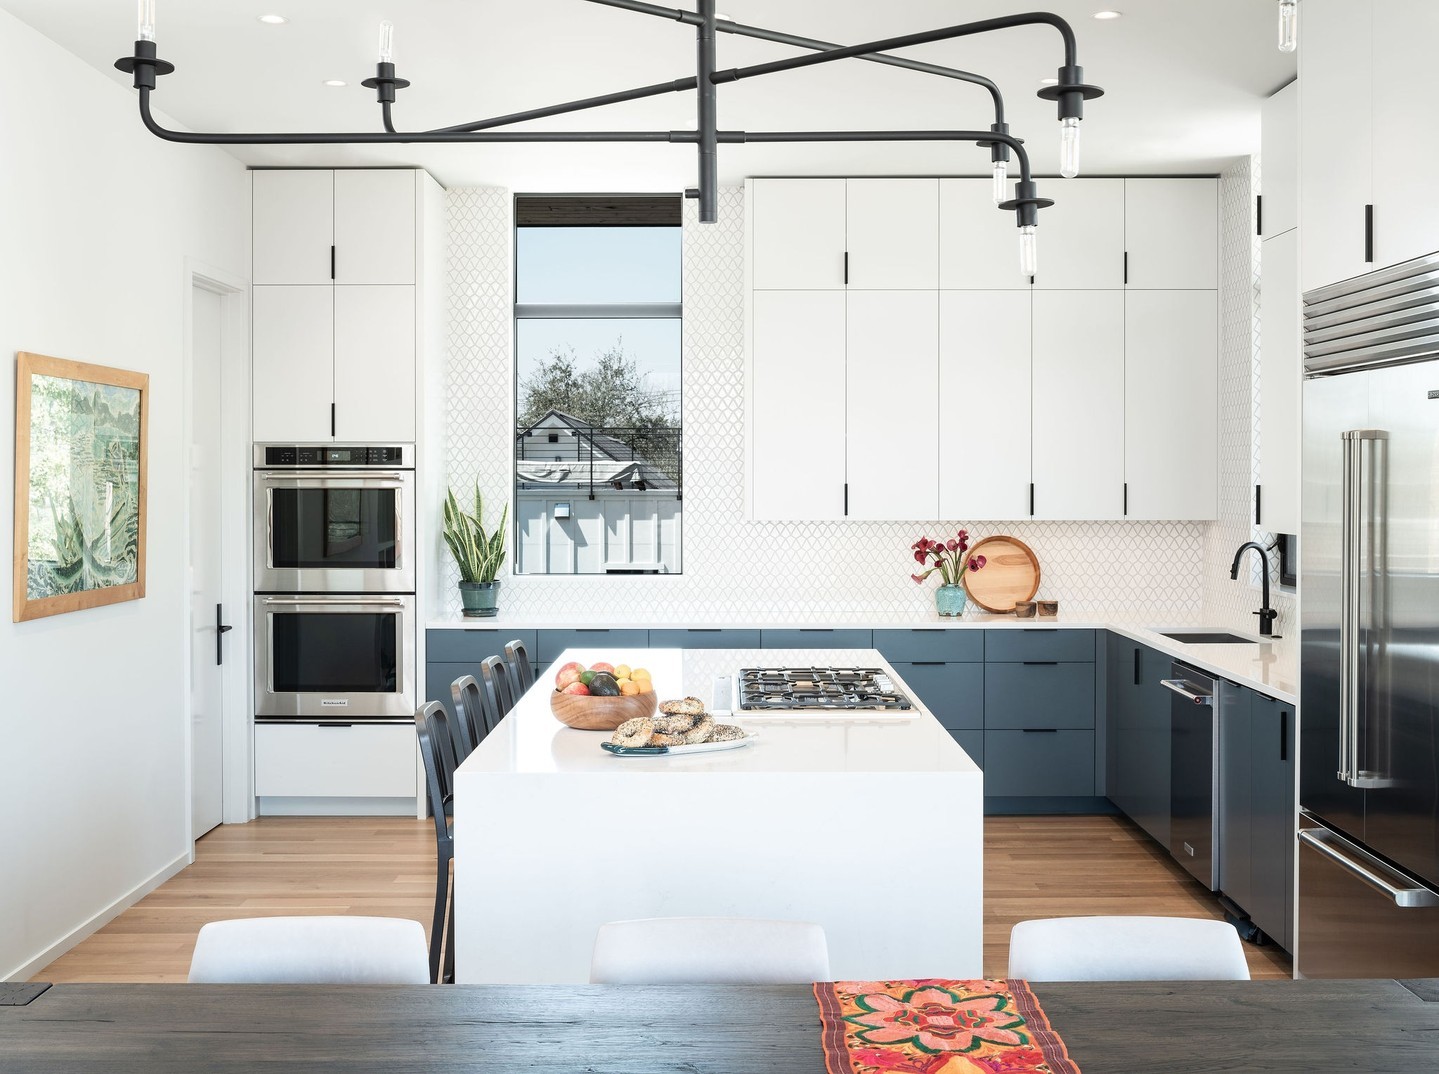 Taking the cabinets to the ceiling is as aesthetically pleasing as it is functional ⁠
⁠
@dc_architecture @jakeholt